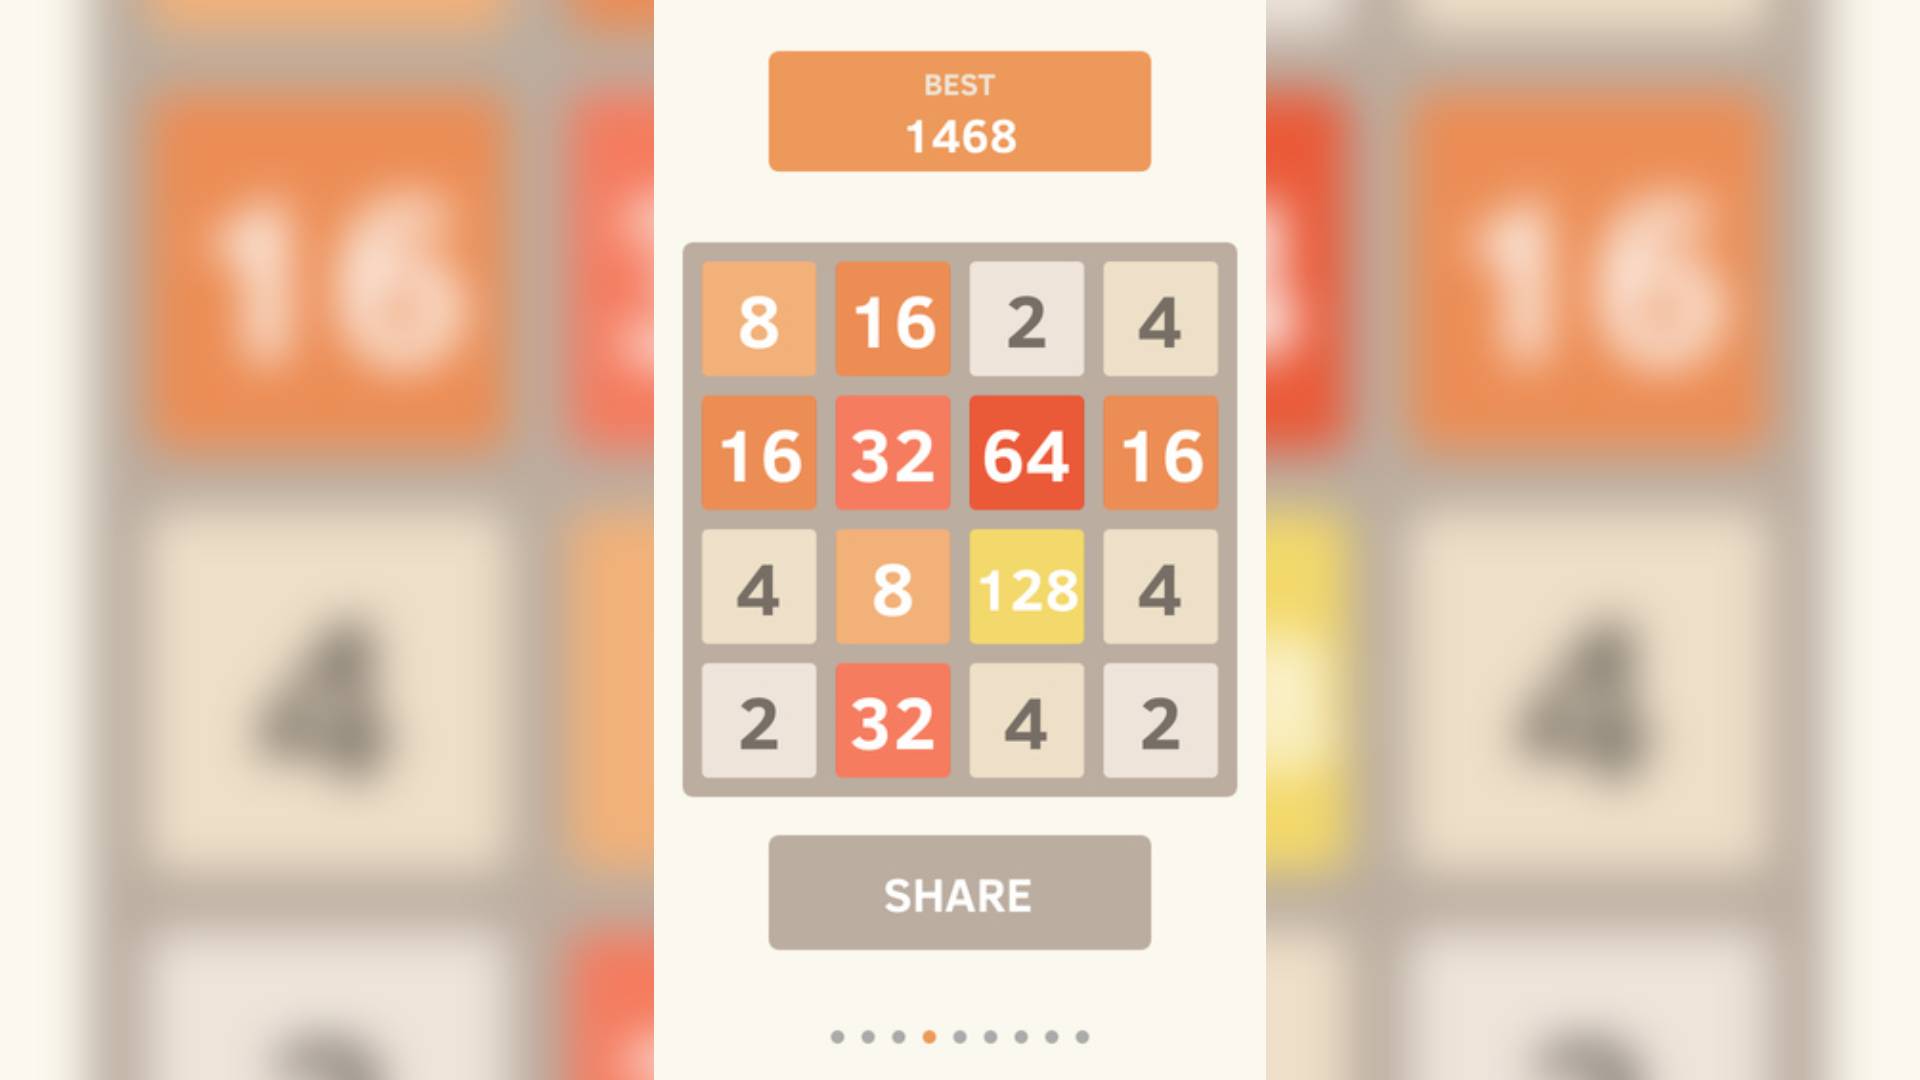 2048 - Play Online at Coolmath Games